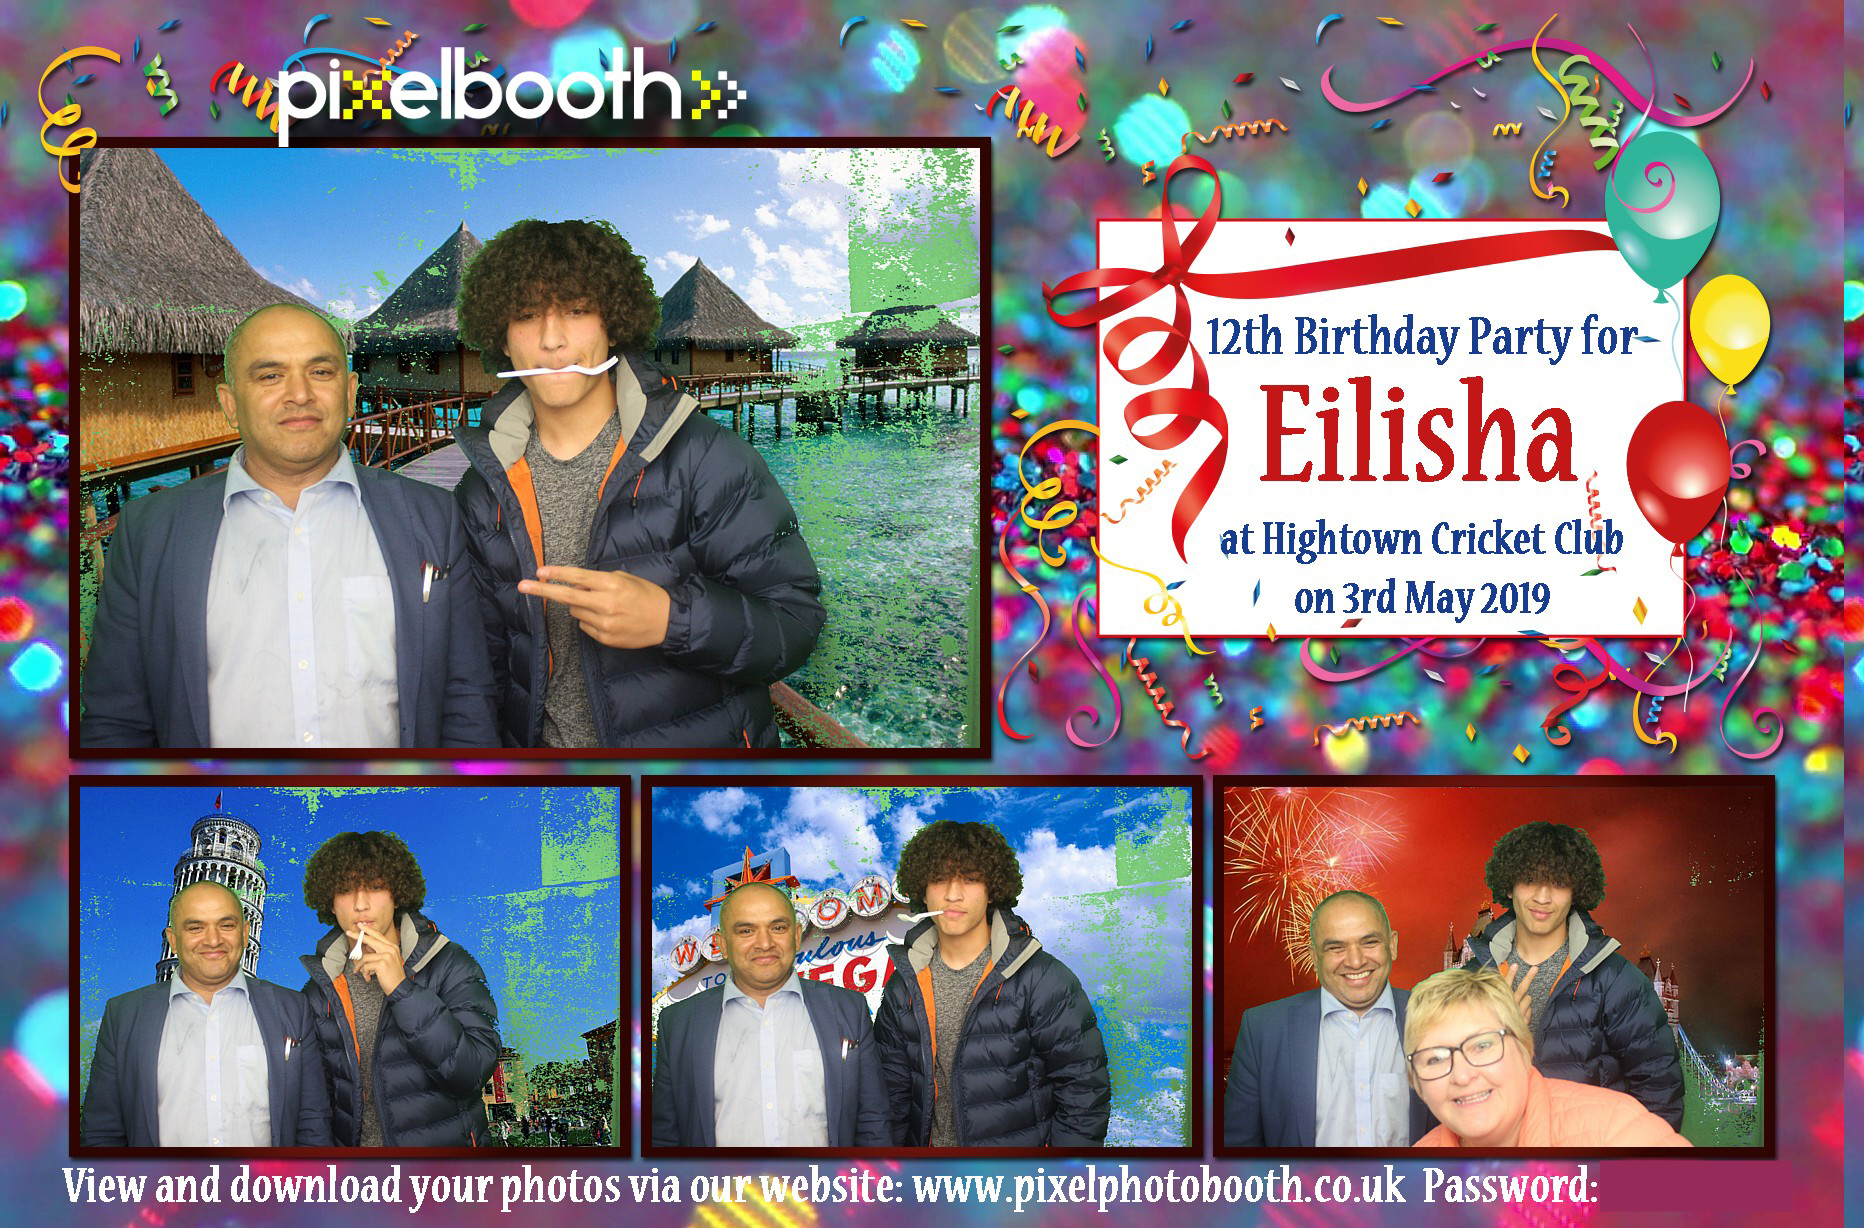 3rd May 2019: 12th Birthday Party for Eilisha (Password protected)